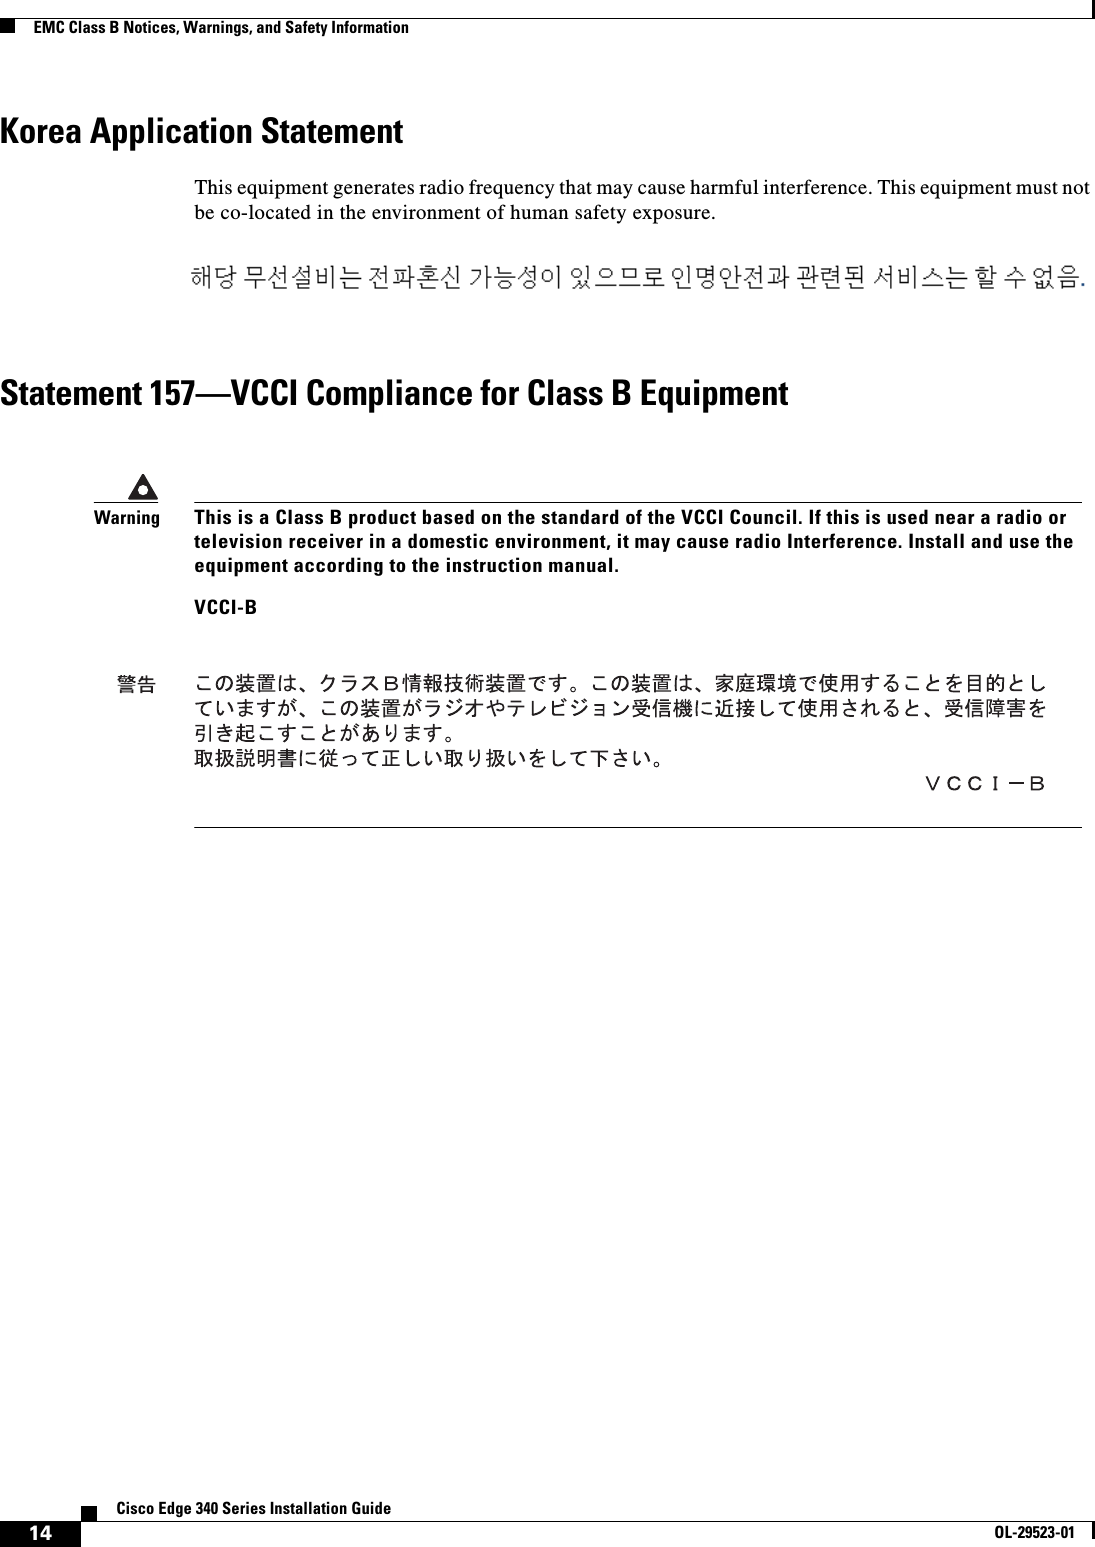  14Cisco Edge 340 Series Installation GuideOL-29523-01EMC Class B Notices, Warnings, and Safety InformationKorea Application StatementThis equipment generates radio frequency that may cause harmful interference. This equipment must not be co-located in the environment of human safety exposure.Statement 157—VCCI Compliance for Class B EquipmentWarningThis is a Class B product based on the standard of the VCCI Council. If this is used near a radio or television receiver in a domestic environment, it may cause radio Interference. Install and use the equipment according to the instruction manual. VCCI-B